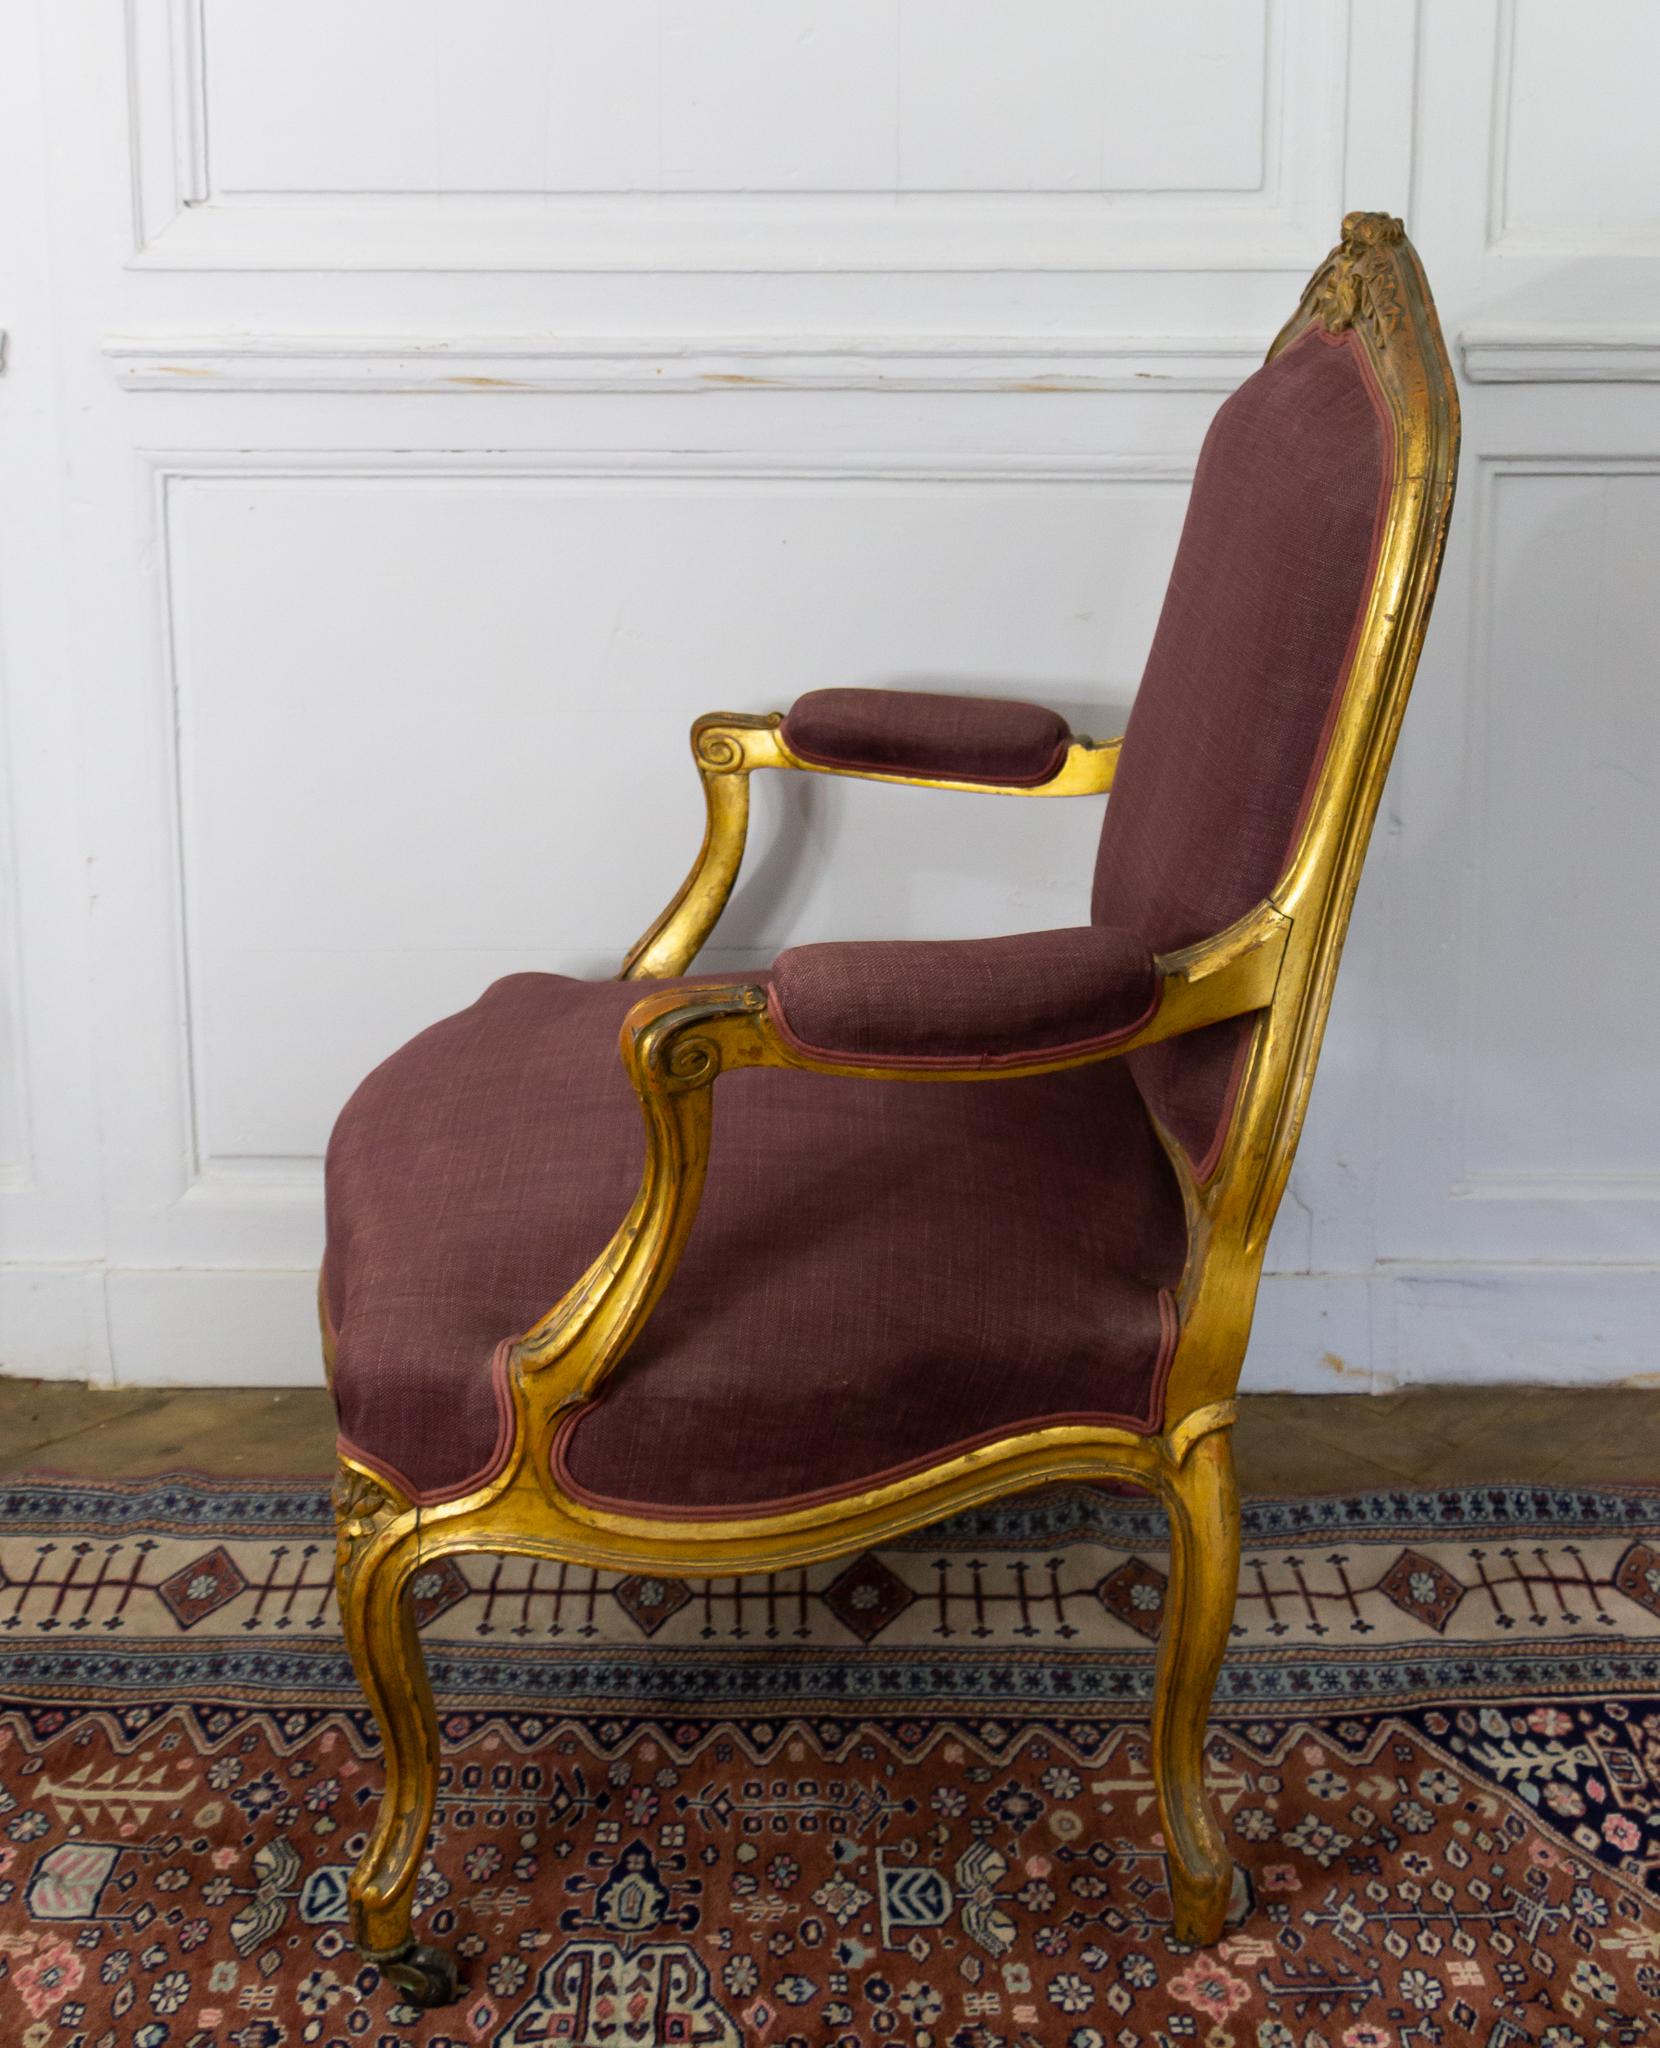 Superb Louis XV style armchair called 